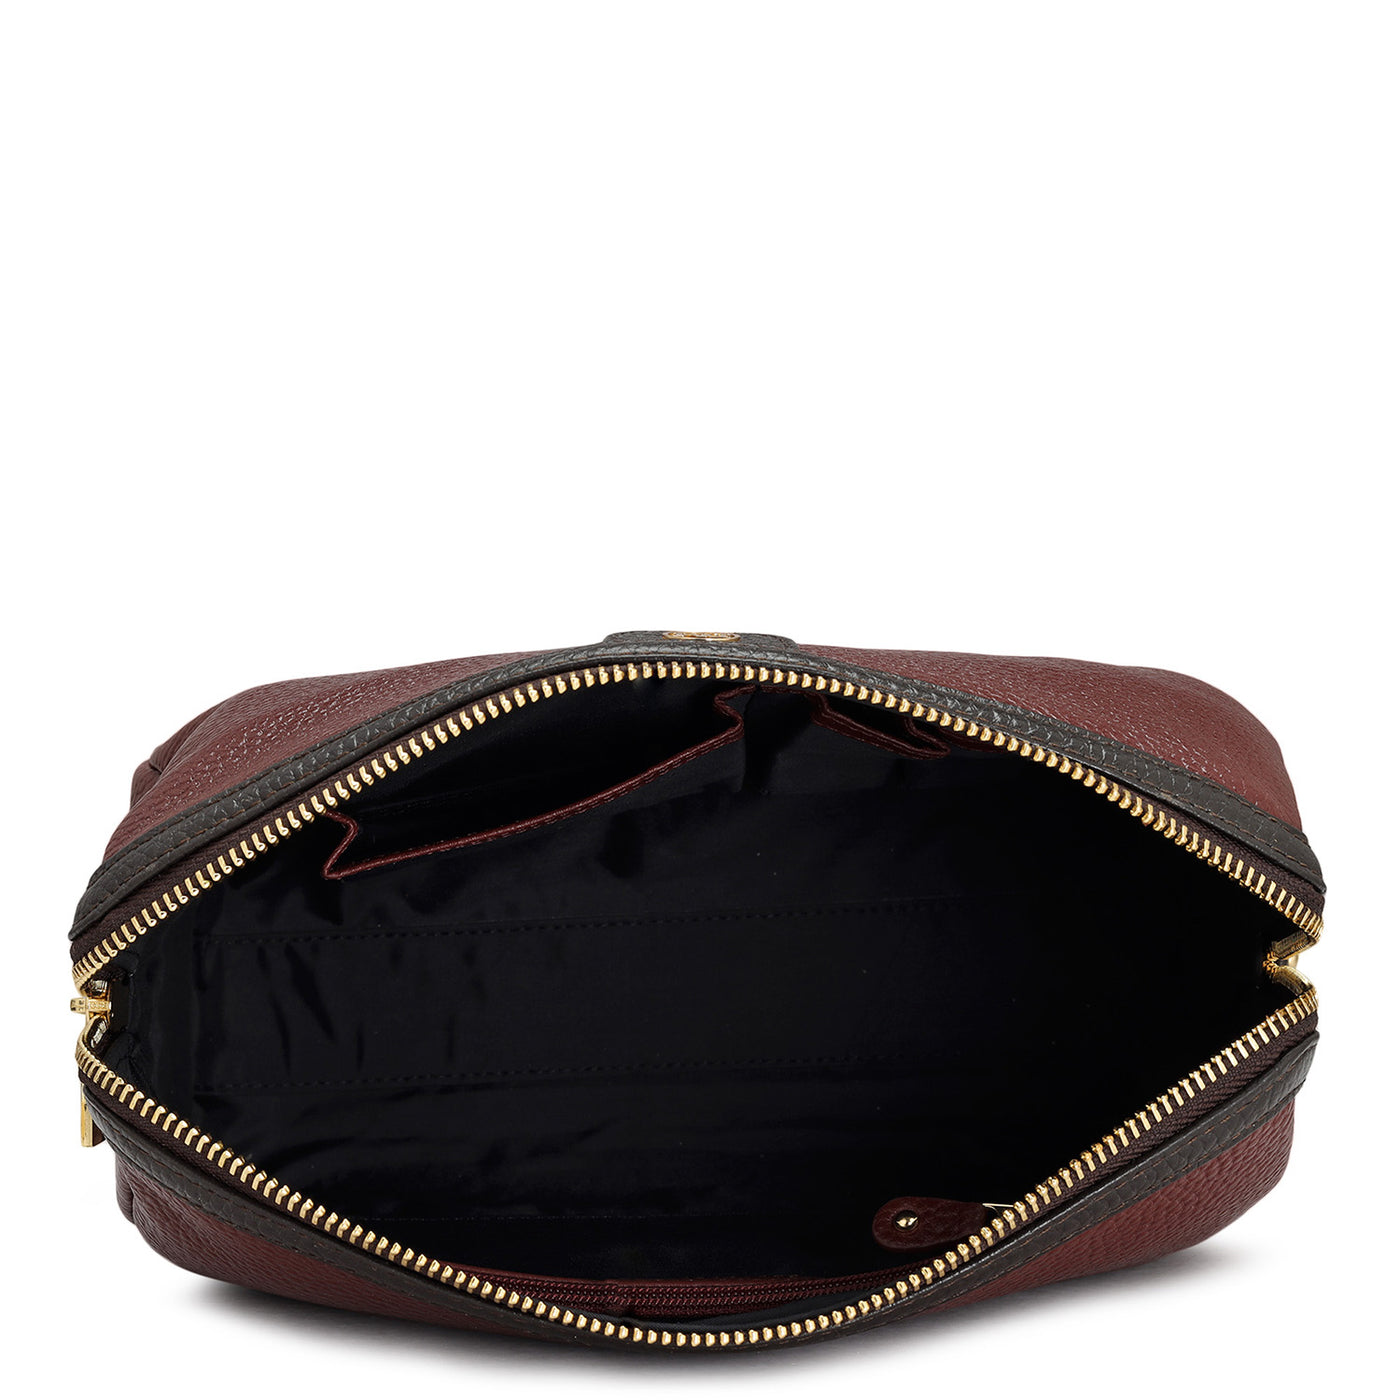 Wax Leather Vanity Pouch - Blood Stone